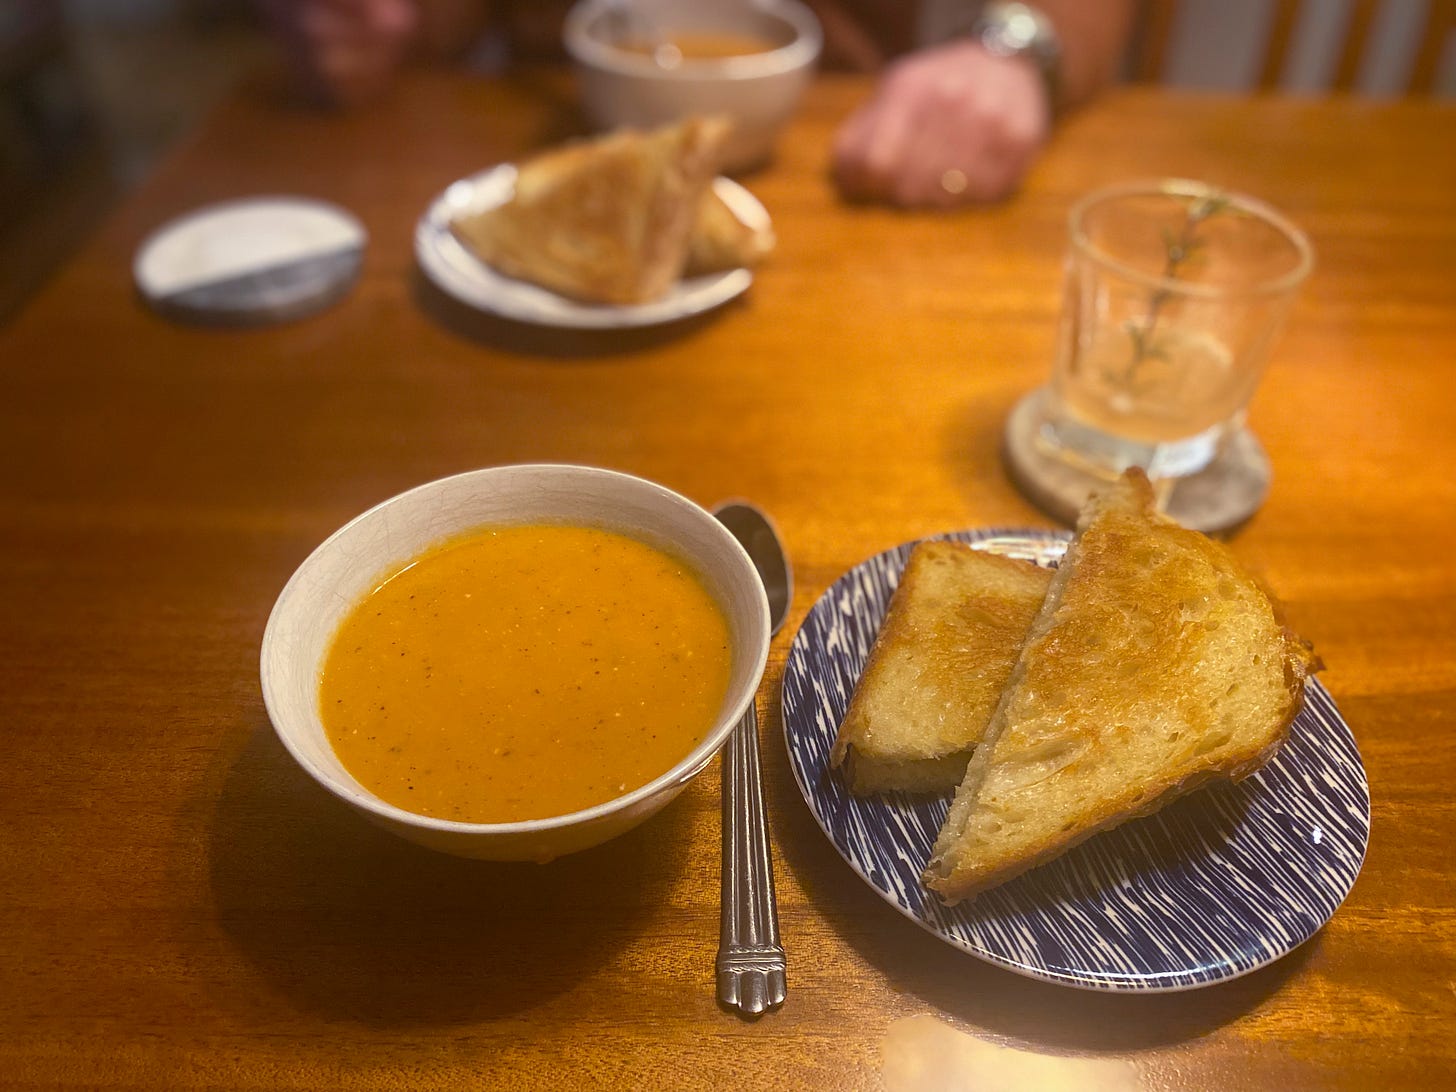 A small bowl of curried tomato and lentil soup, and a grilled cheese sandwich on a blue and white plate next to it. Across the table is the same, and a half-finished cocktail with a sprig of rosemary rests on a coaster between them and to the right.